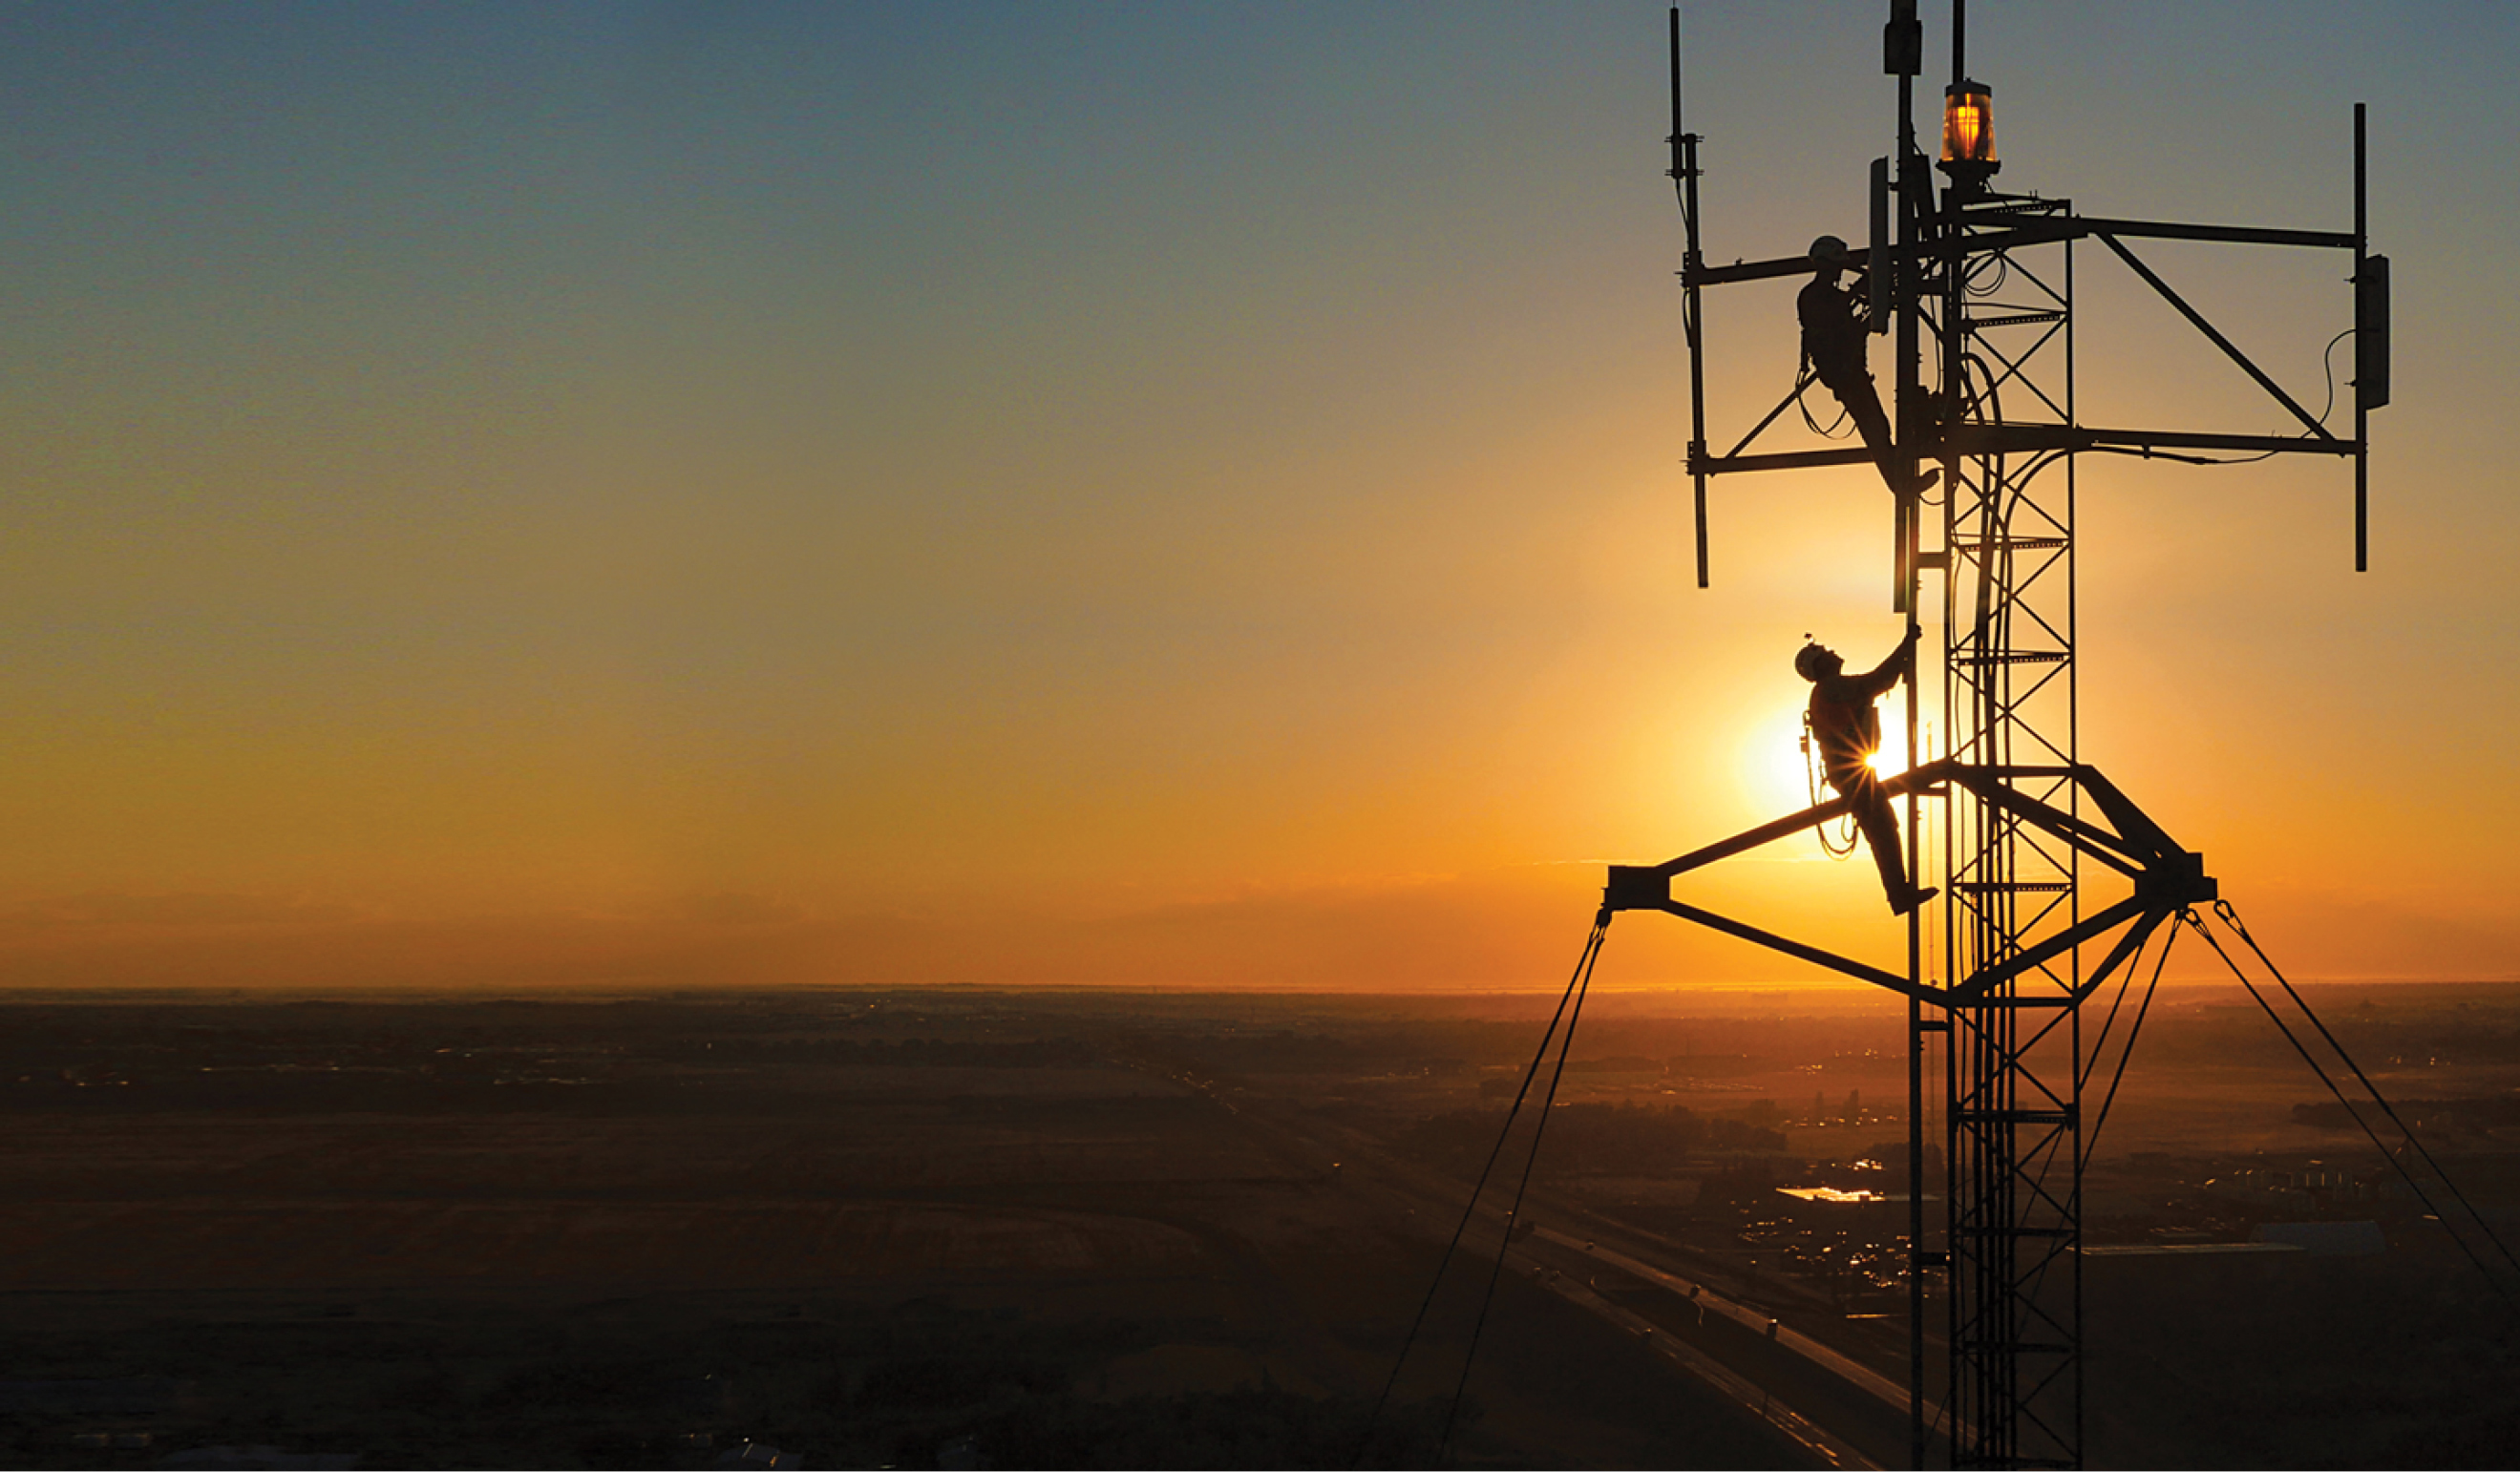 SaskTel completes $107 million Wireless Saskatchewan initiative with the launch of 10 new cell towers